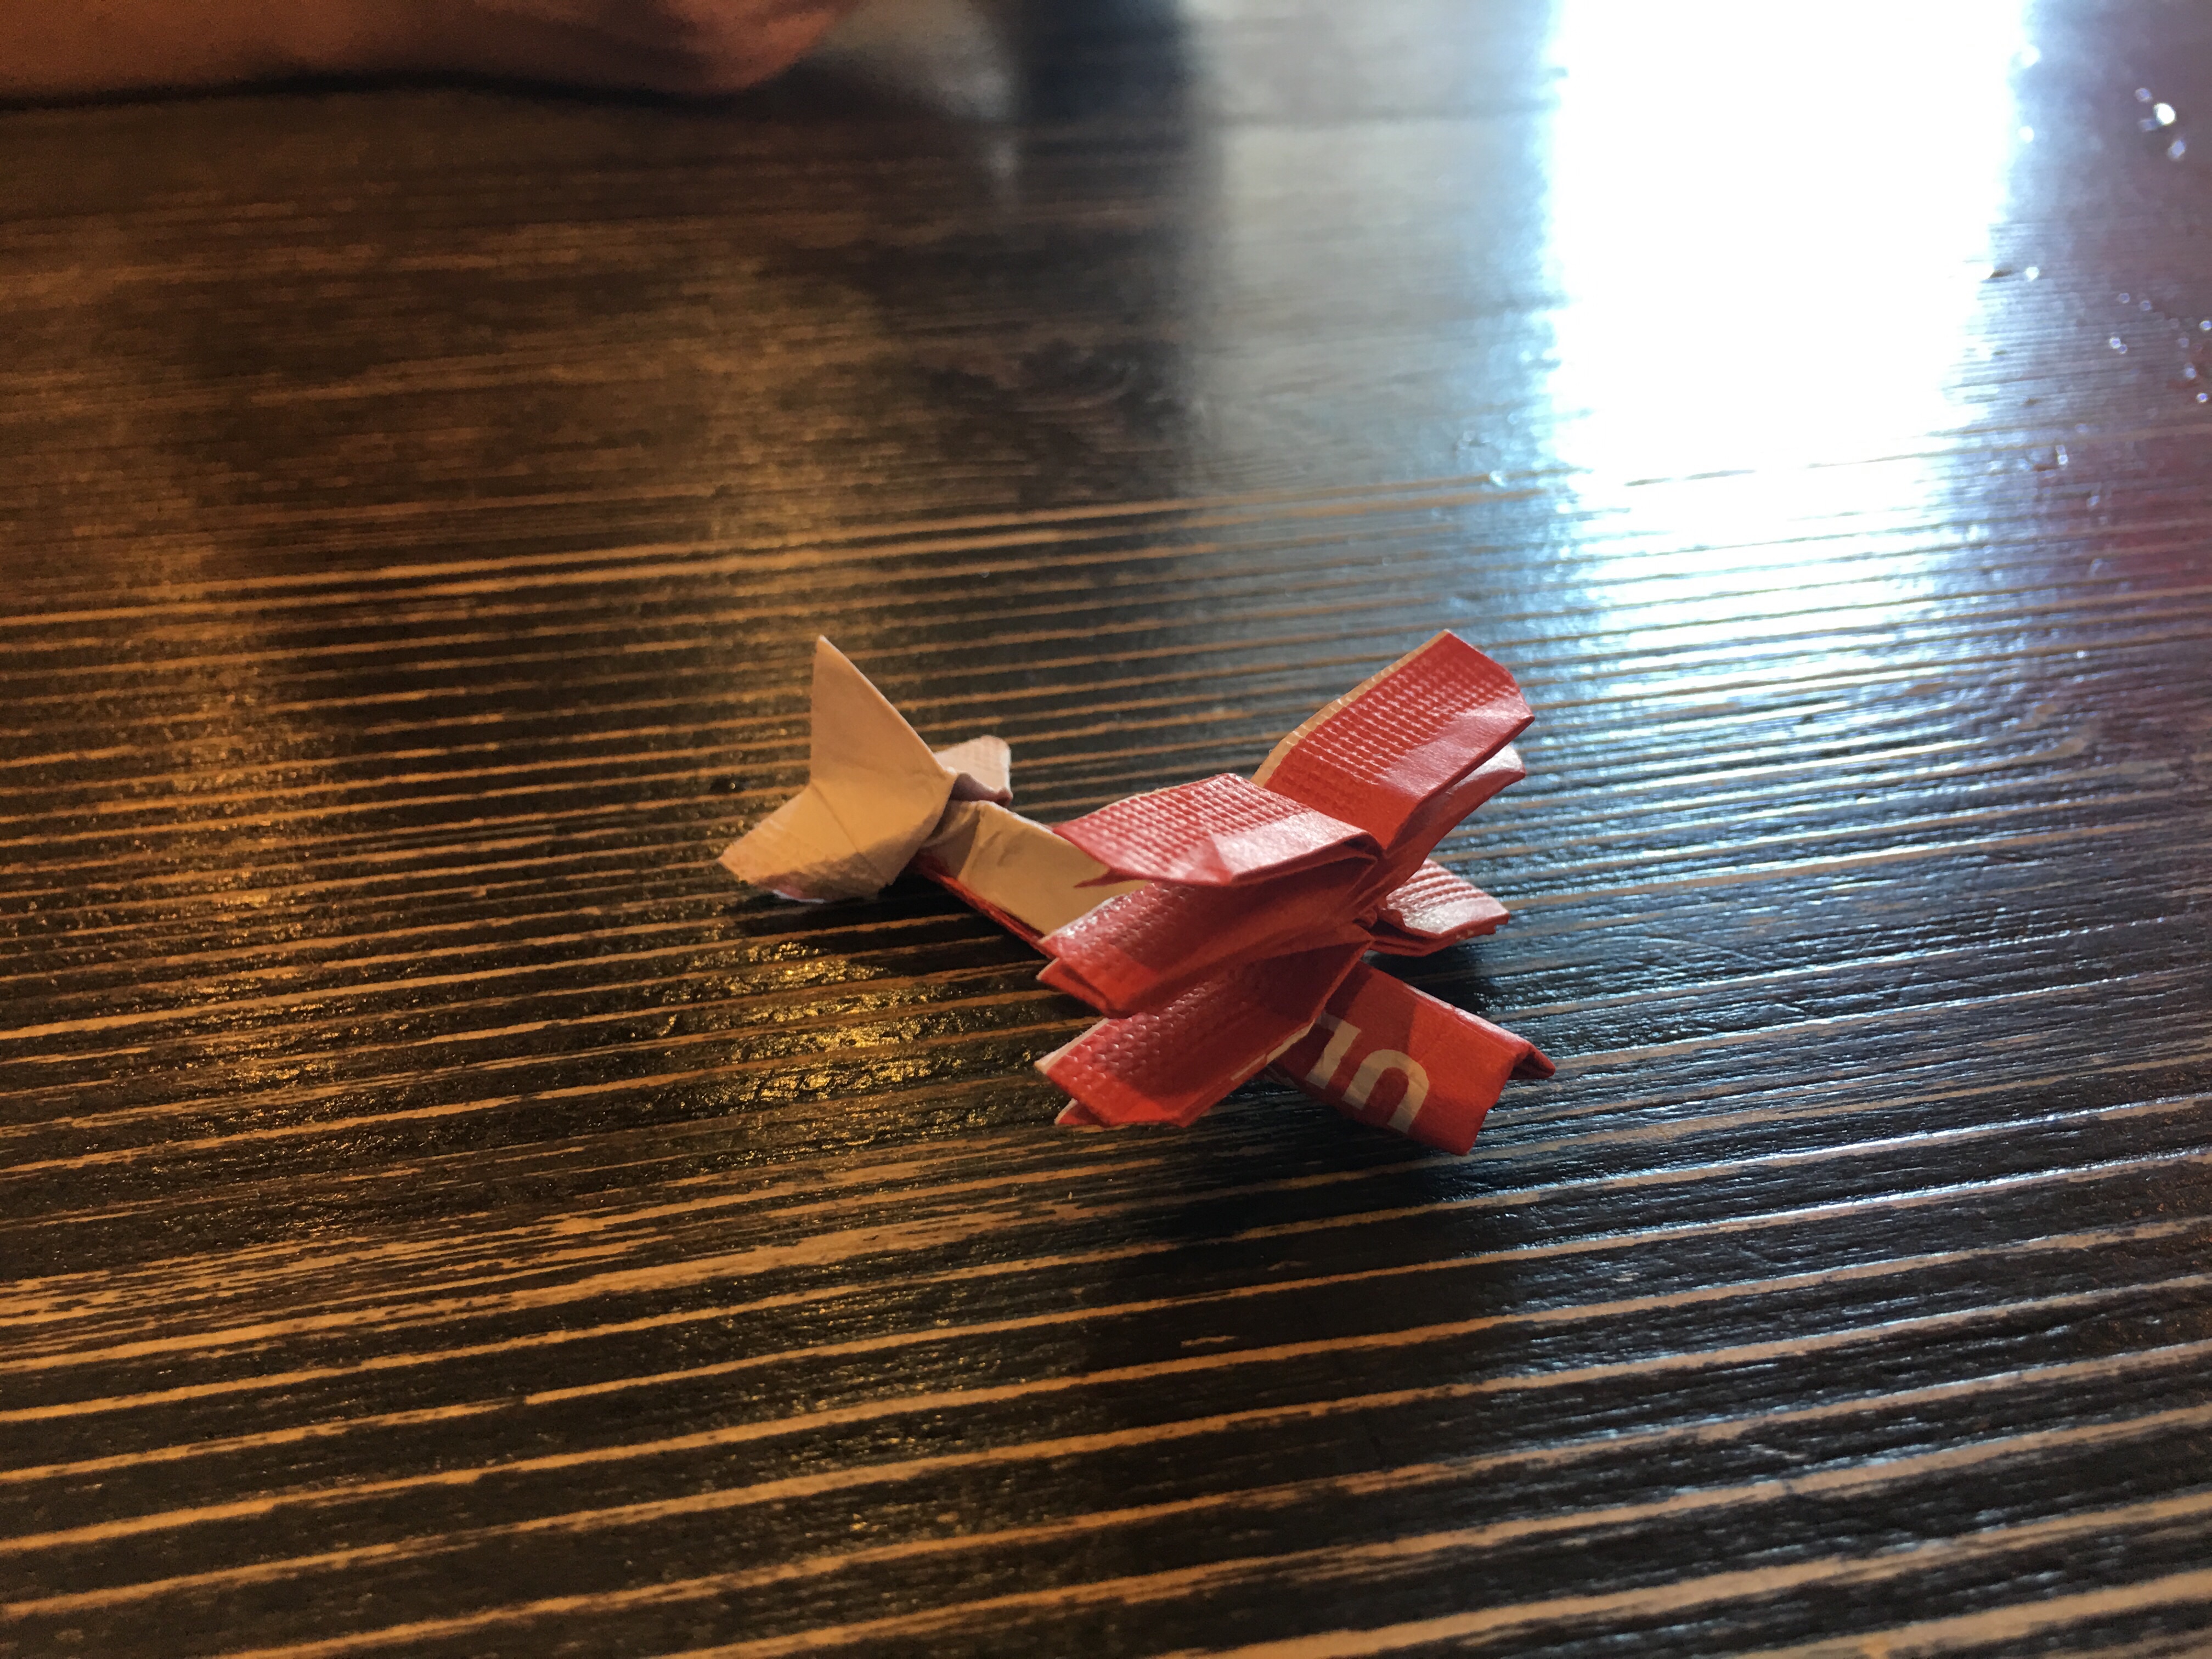 Origami triplane made from chopstick wrapper